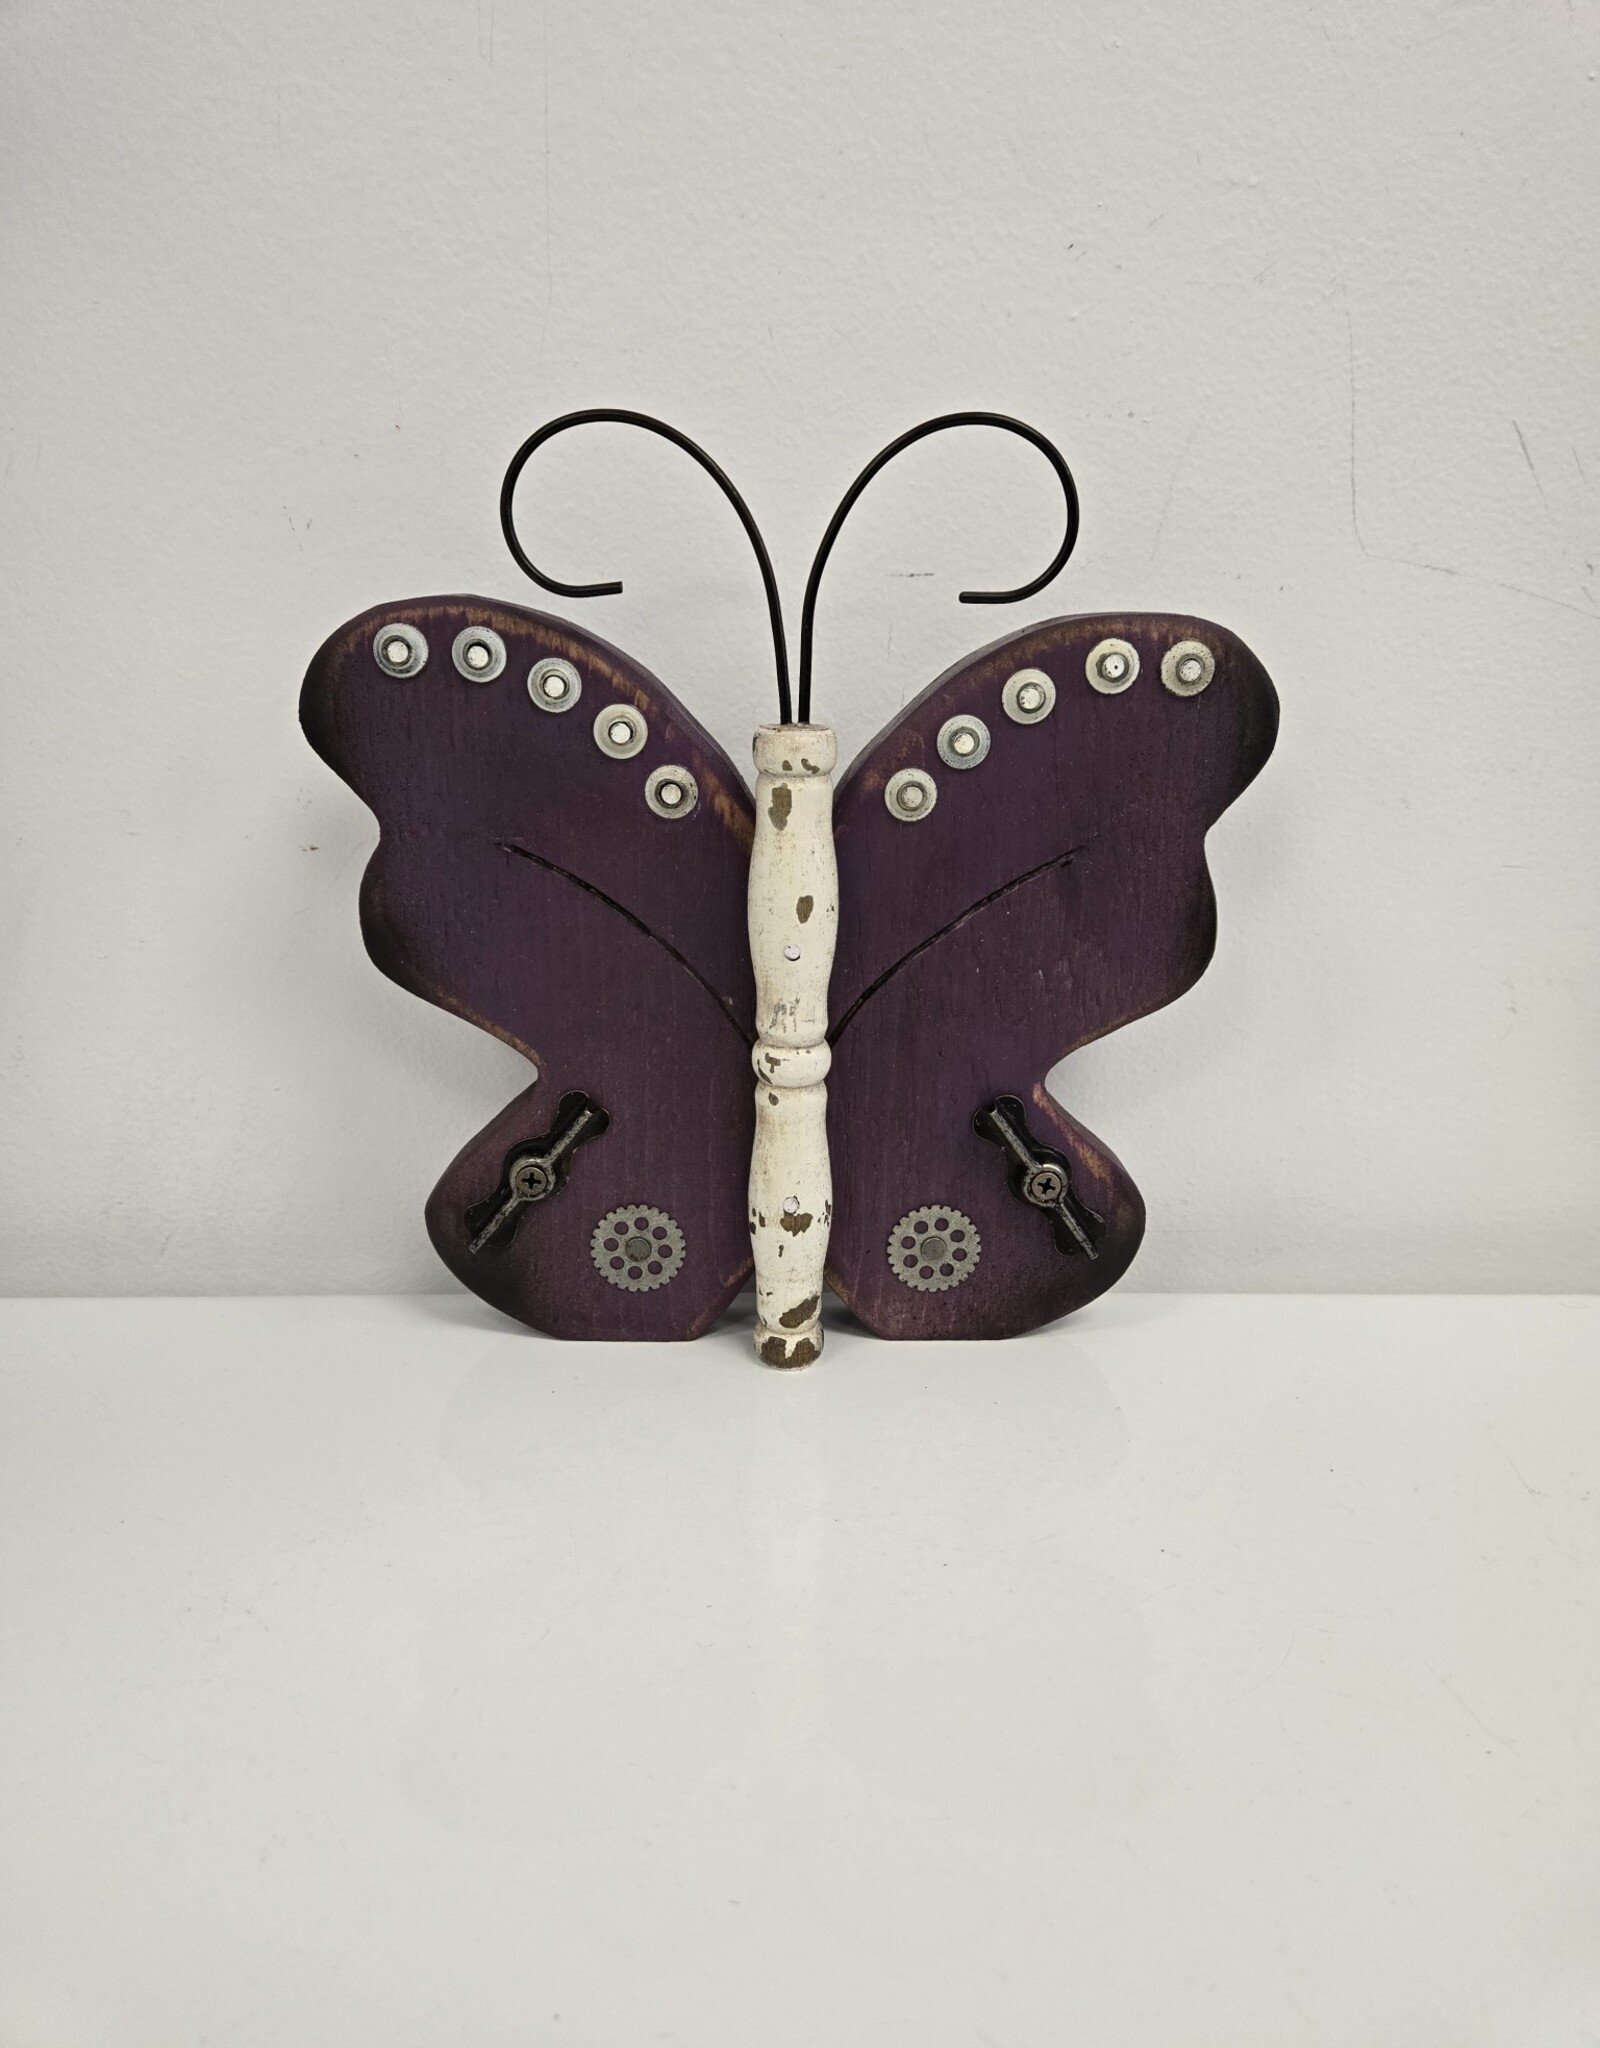 Whimsical Wooden Butterfly - purple